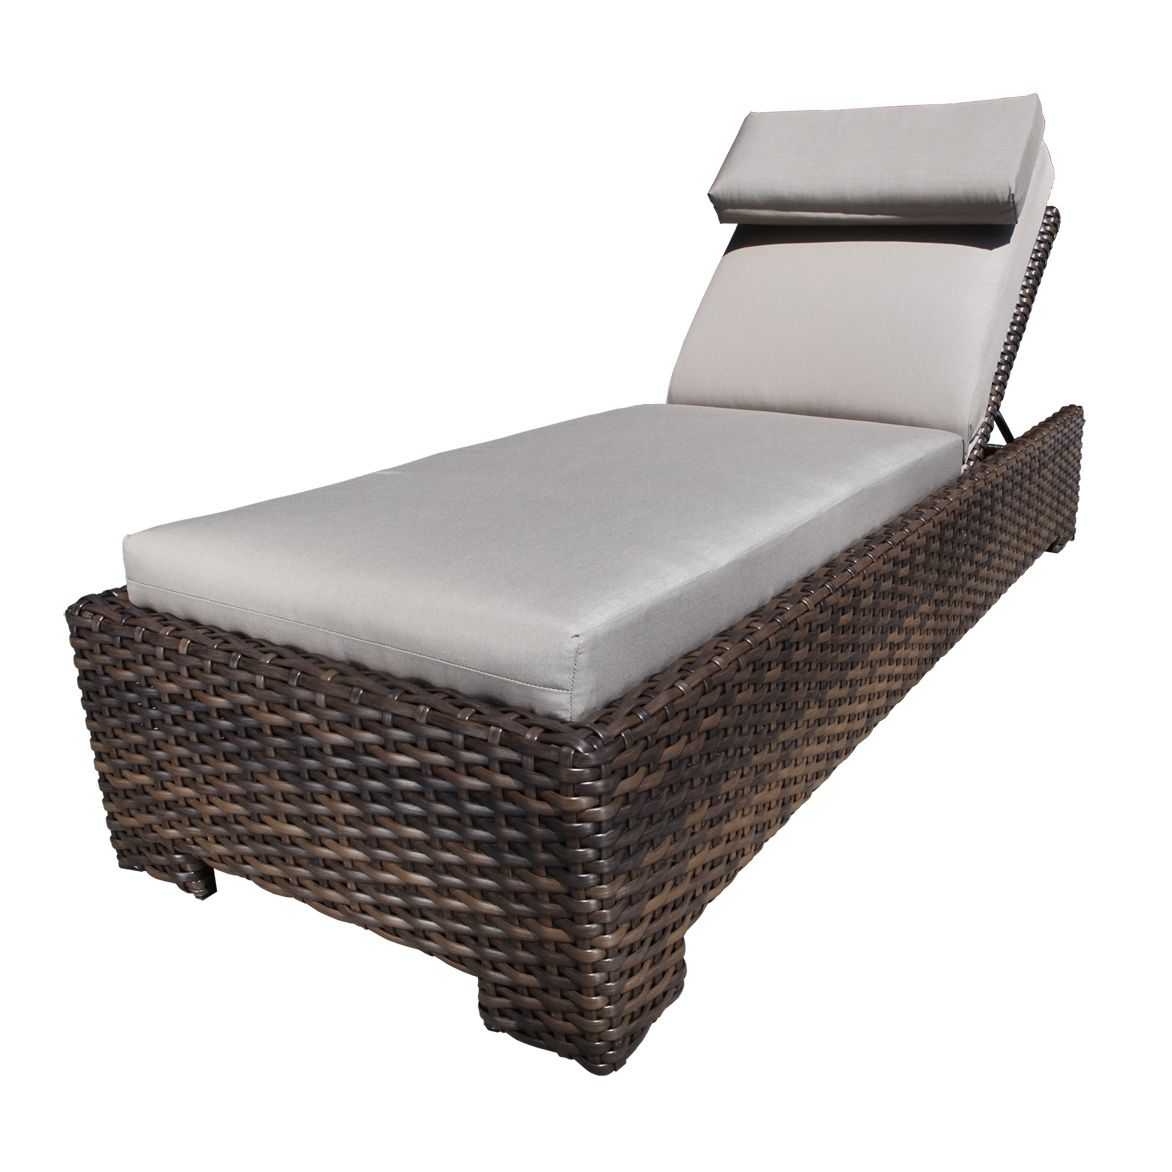 Recent Chaise Lounge Chairs In Canada Regarding Patio Outdoor Chaise Lounge Chairs : Best Outdoor Chaise Lounge (View 6 of 15)